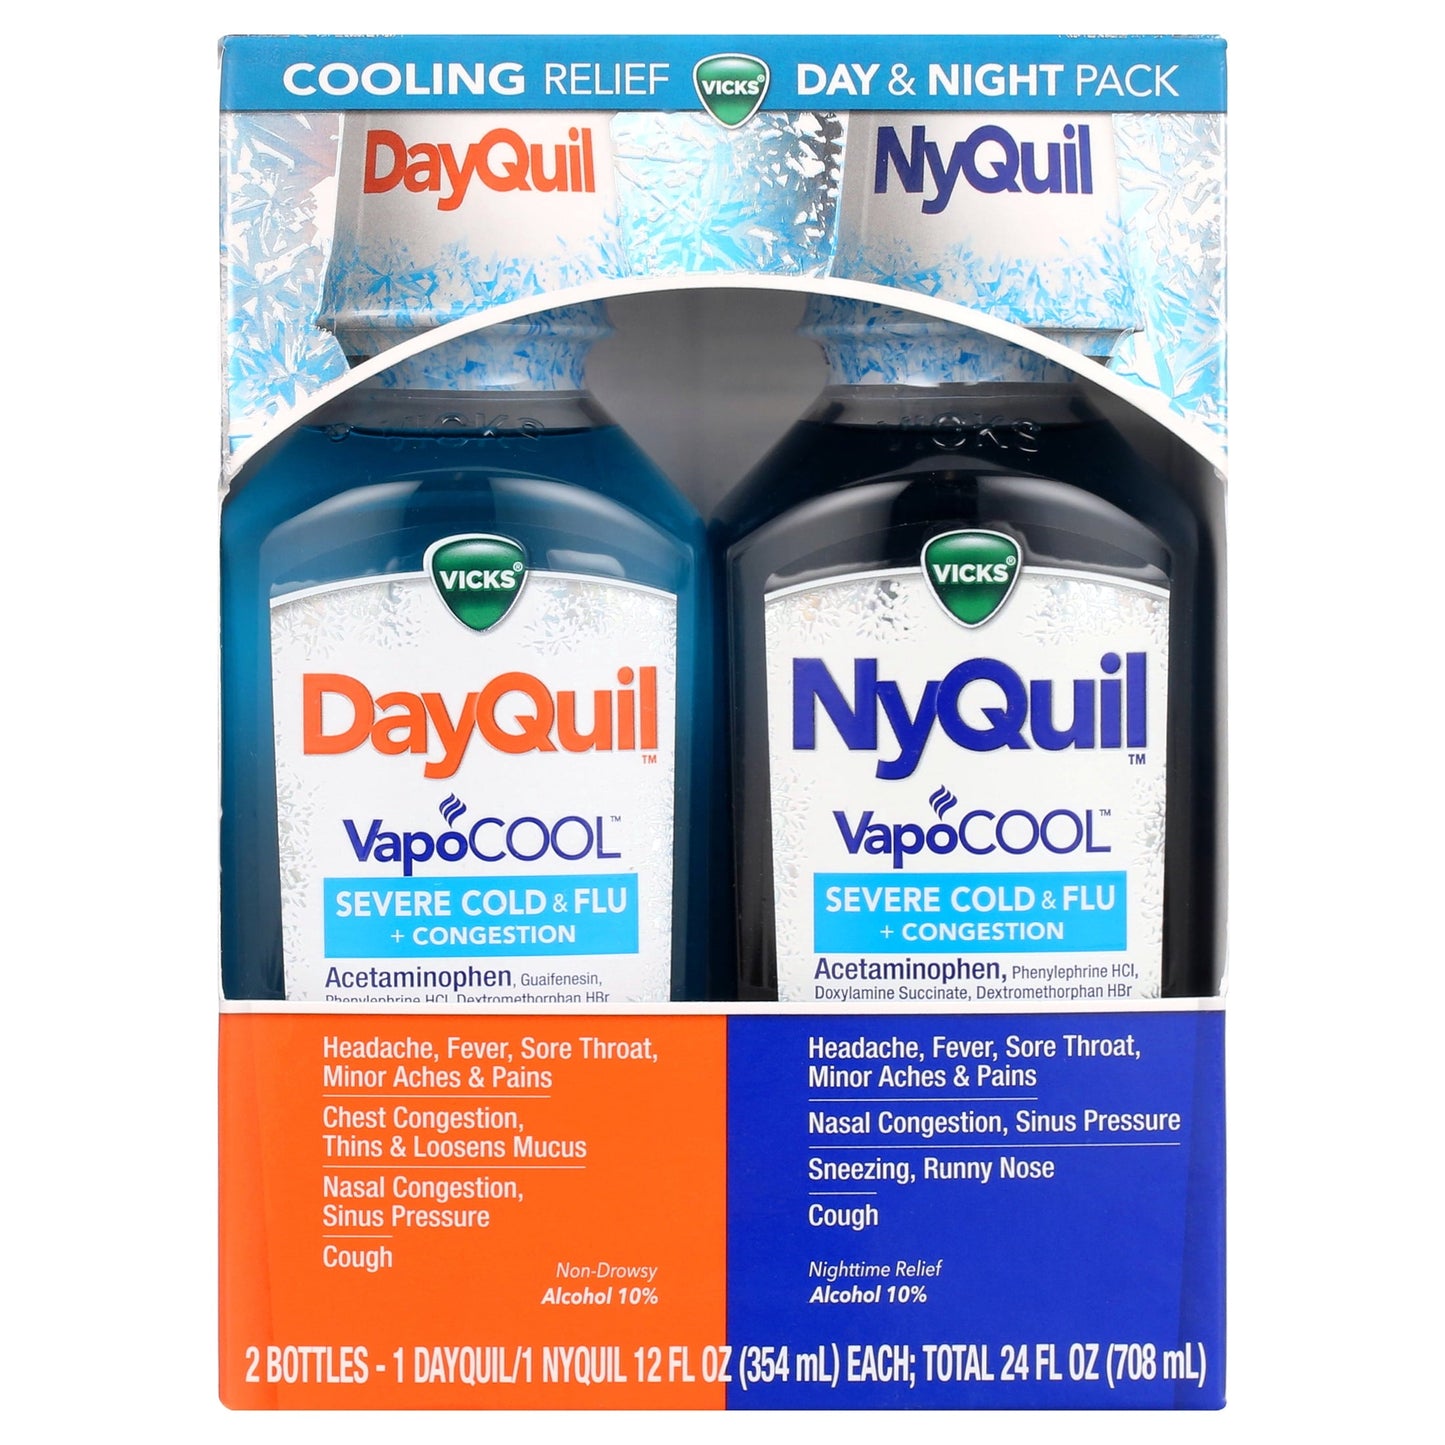 Vicks Dayquil & Nyquil Vapocool Liquid Cold & Flu Medicine, over-the-Counter Medicine, 2 x12 fl. oz.